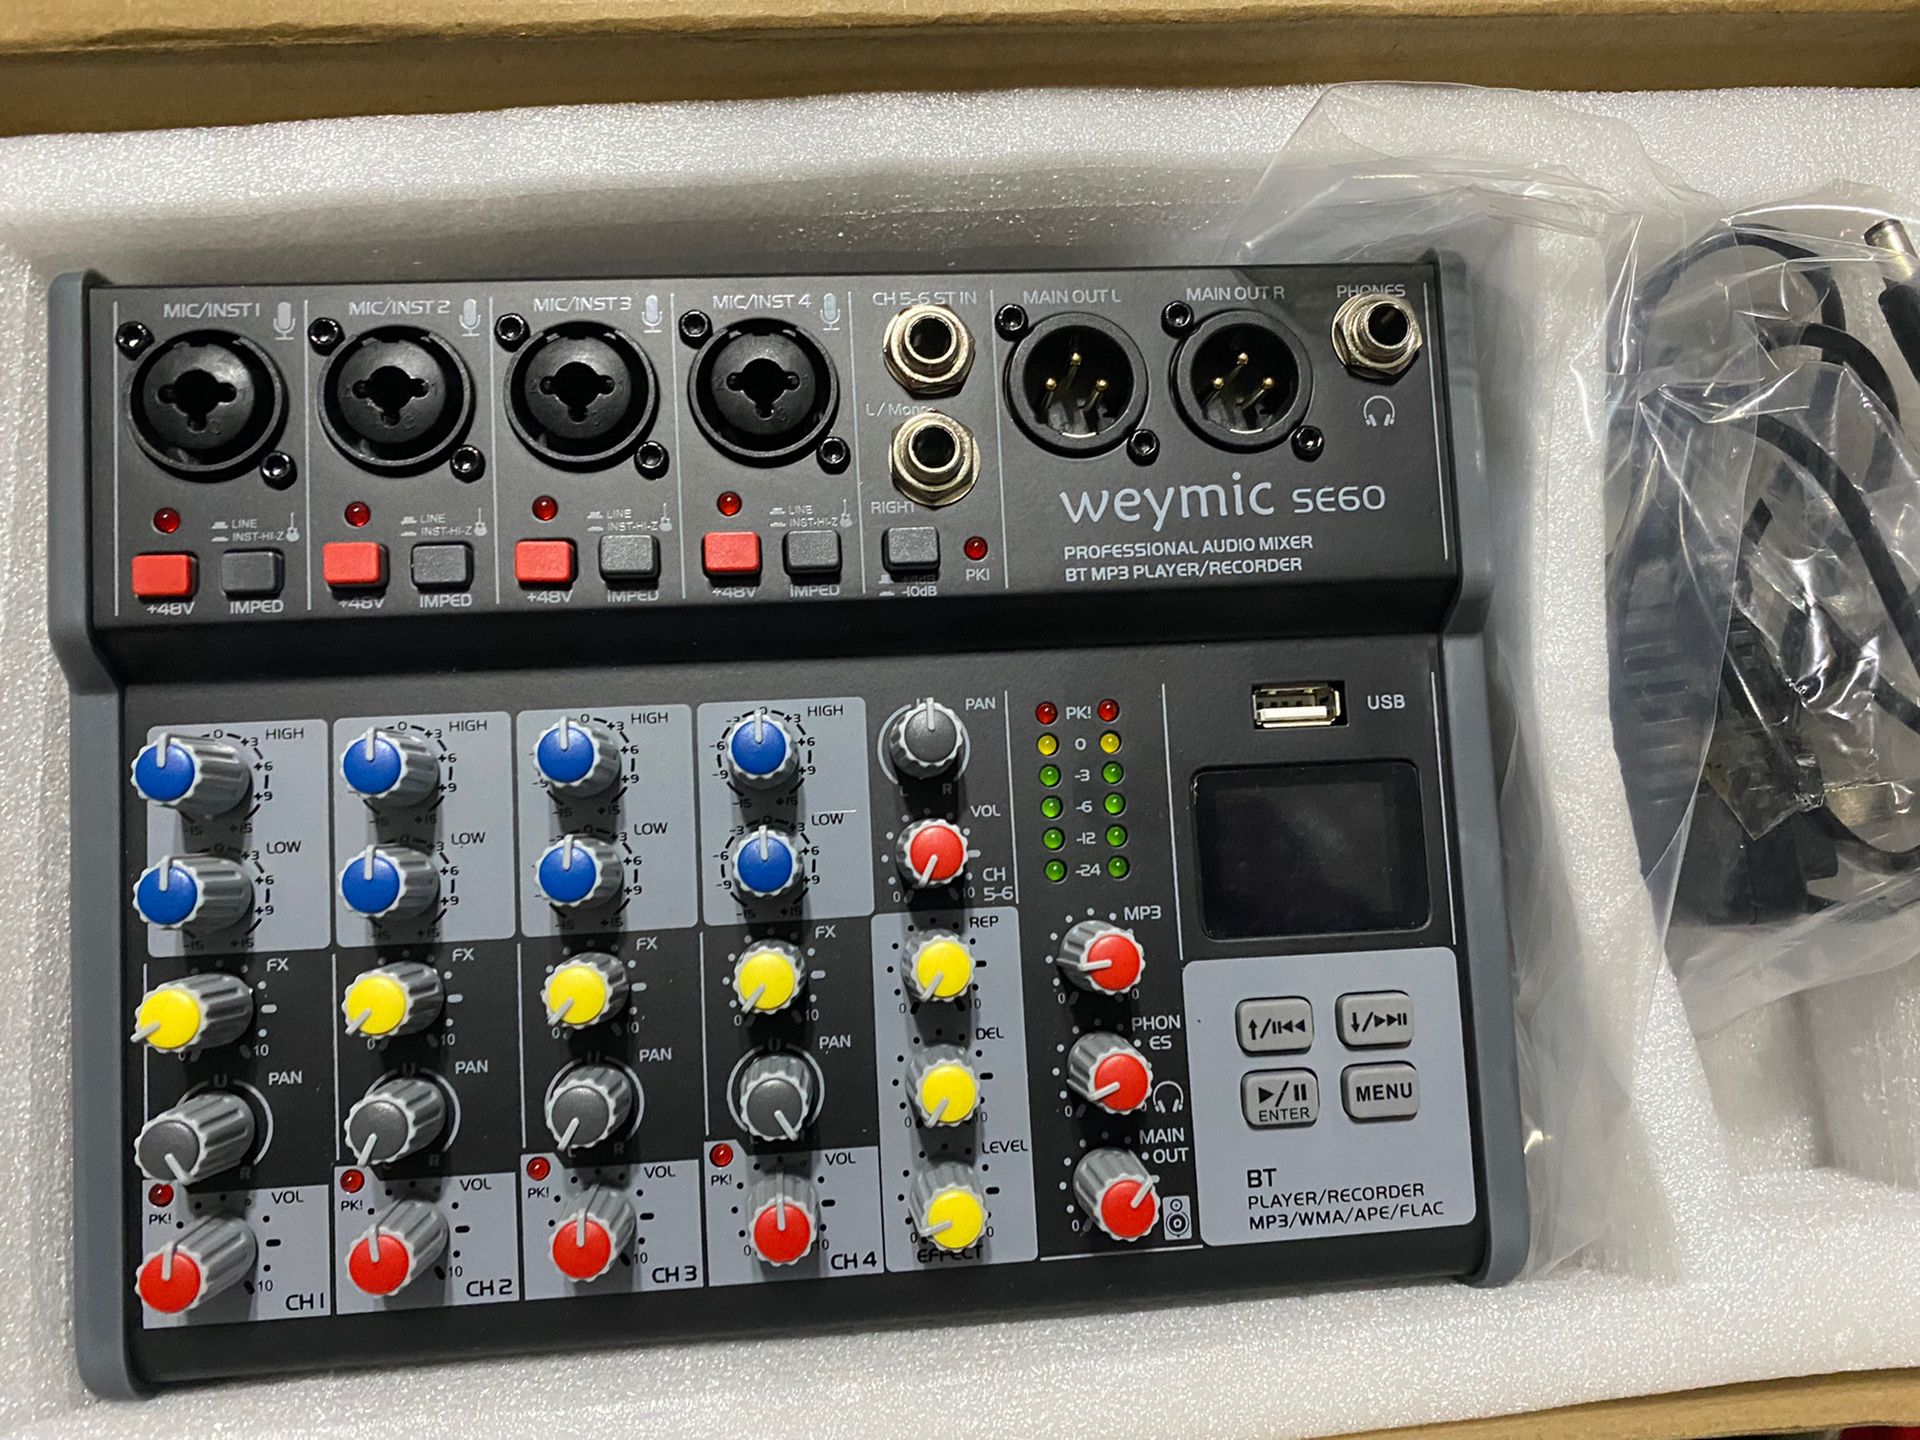 Joya,　for　48V　for　Recording　TX　Jack,　Professional　Computer　Karaoke　DJ　Mixer　in　XLR　w/USB　Input,　La　Recording　Power(6-Channel)　Stage　SE-60　Weymic　Microphone　Sale　Drive　for　OfferUp